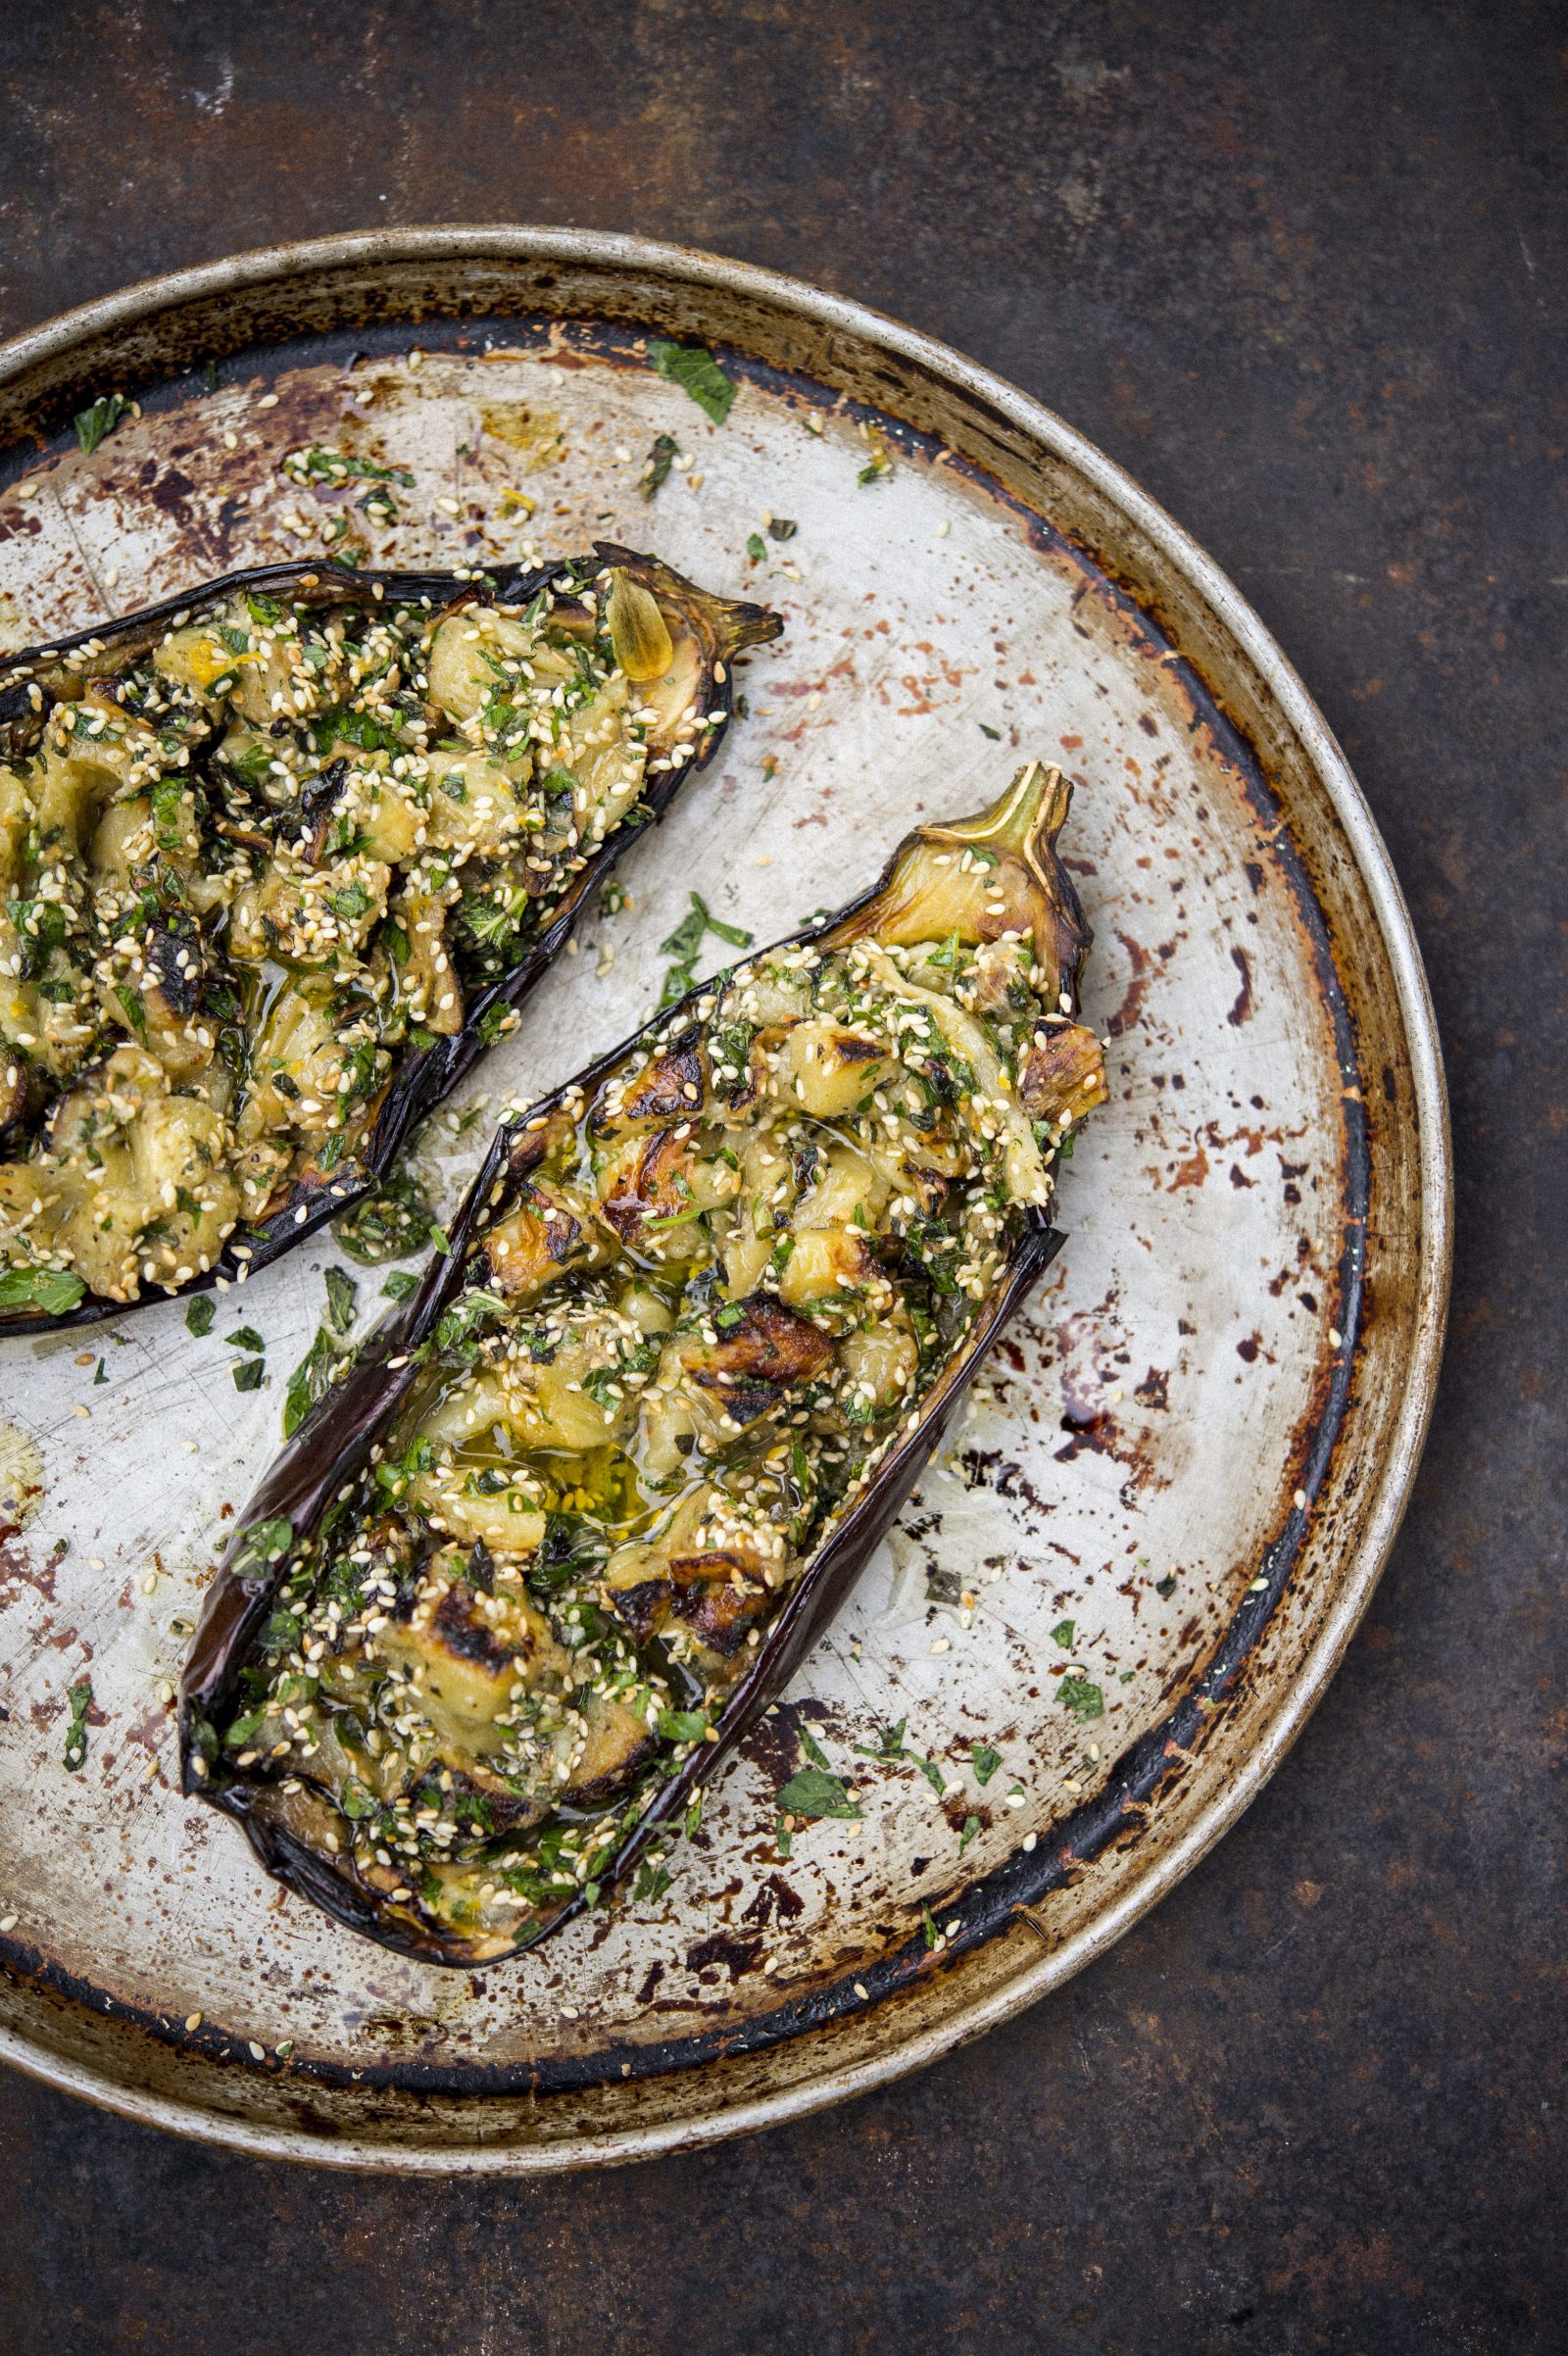 Grilled Eggplant with Sesame and Herbs